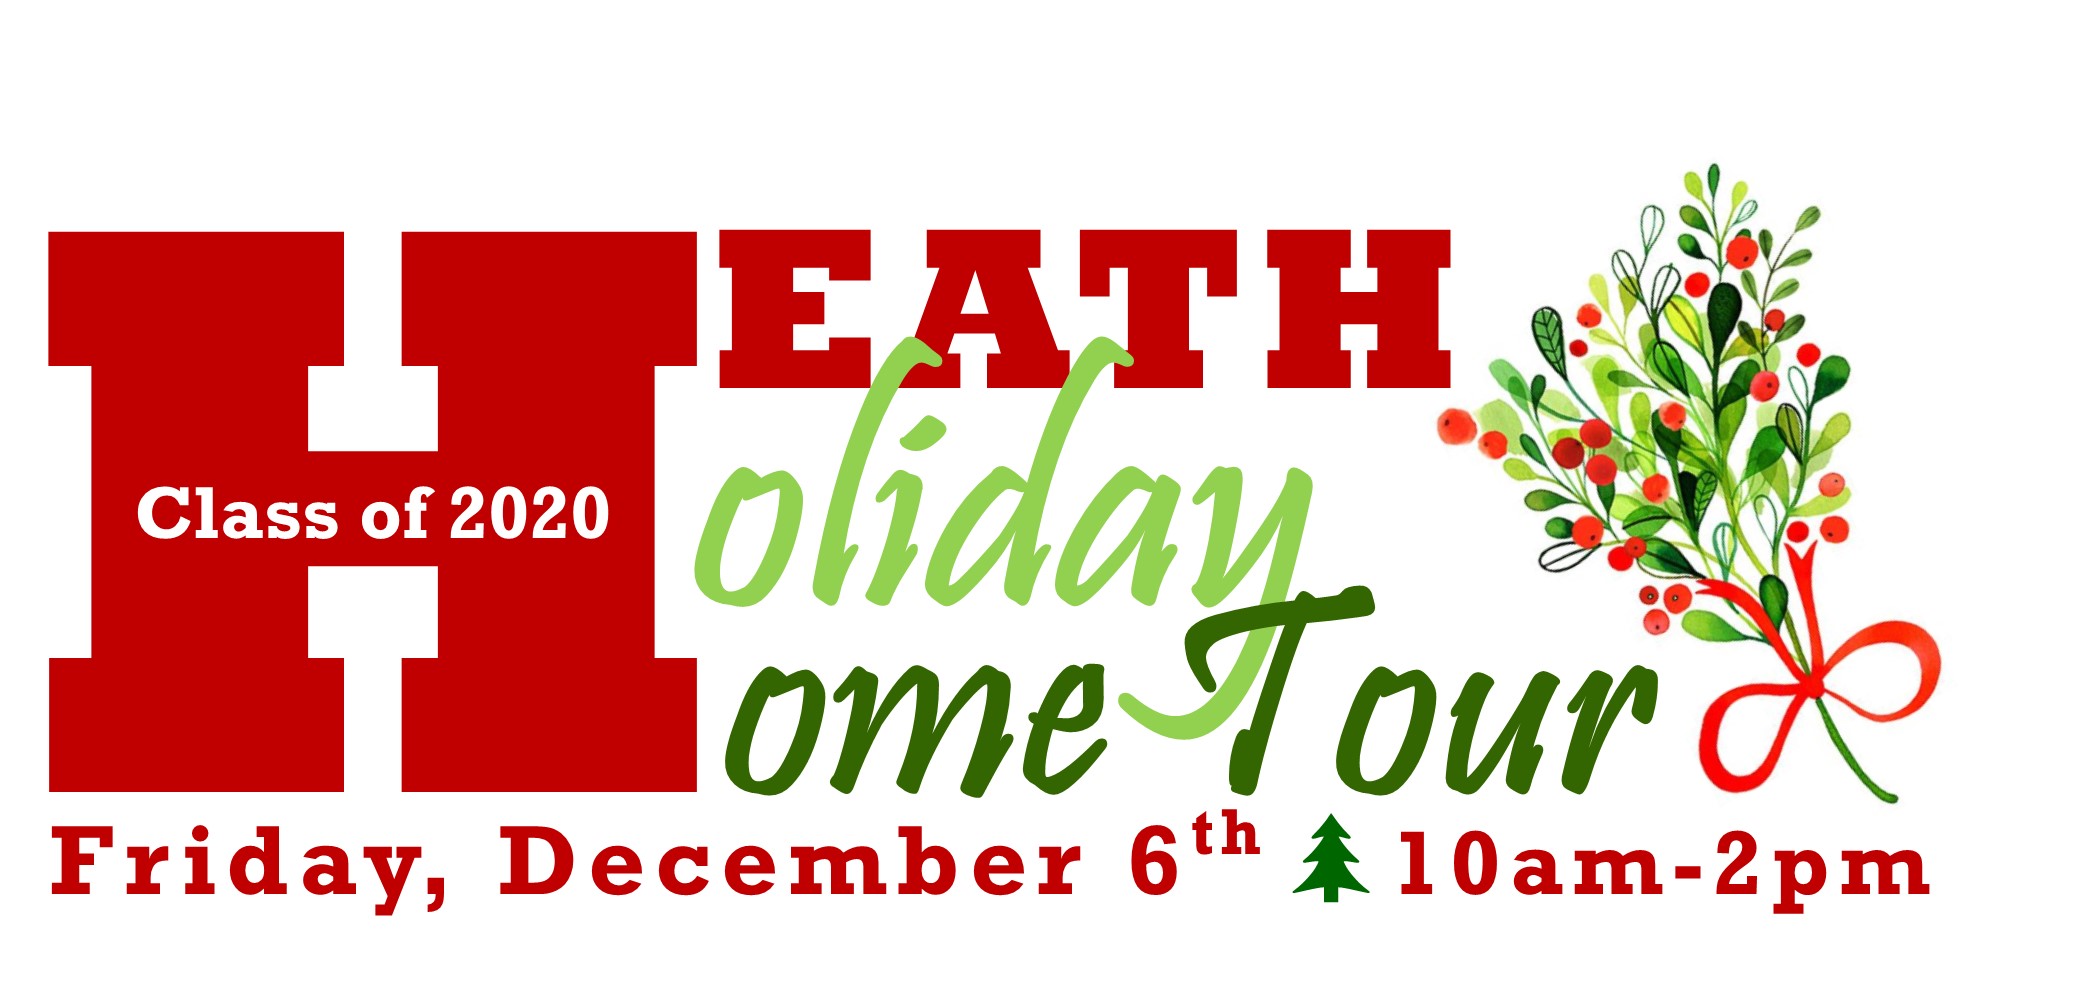 Heath Holiday Home Tour 2019 with dates